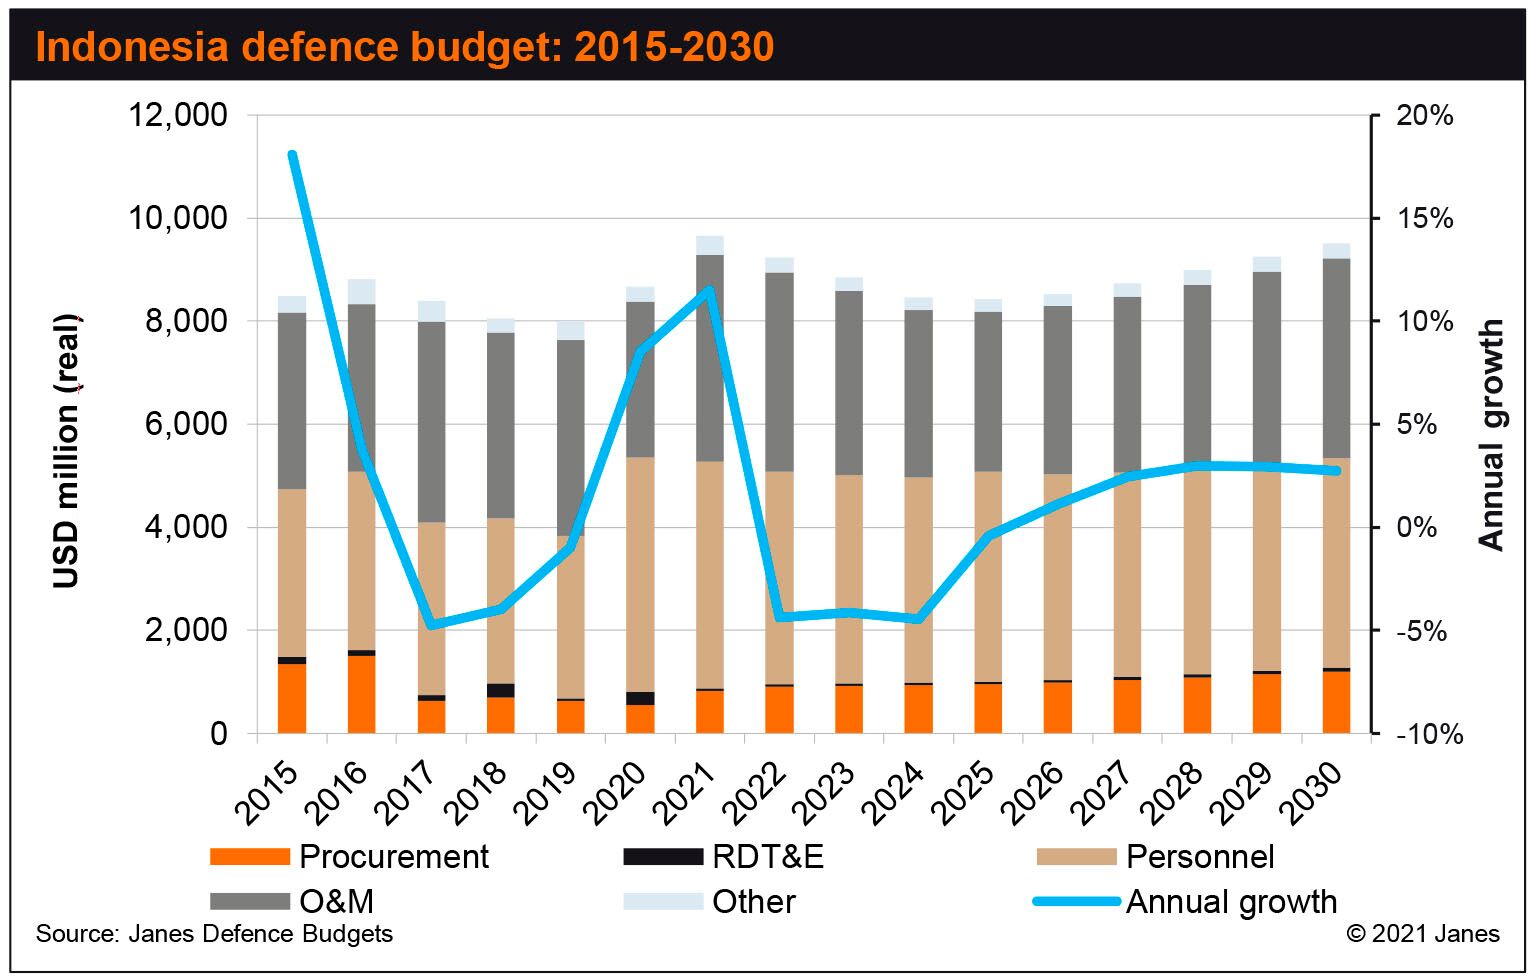 Janes Defence Budgets forecasts real-term declines in Indonesia's defence budget in the near term. Growth is forecast from 2025. (Janes Defence Budgets)